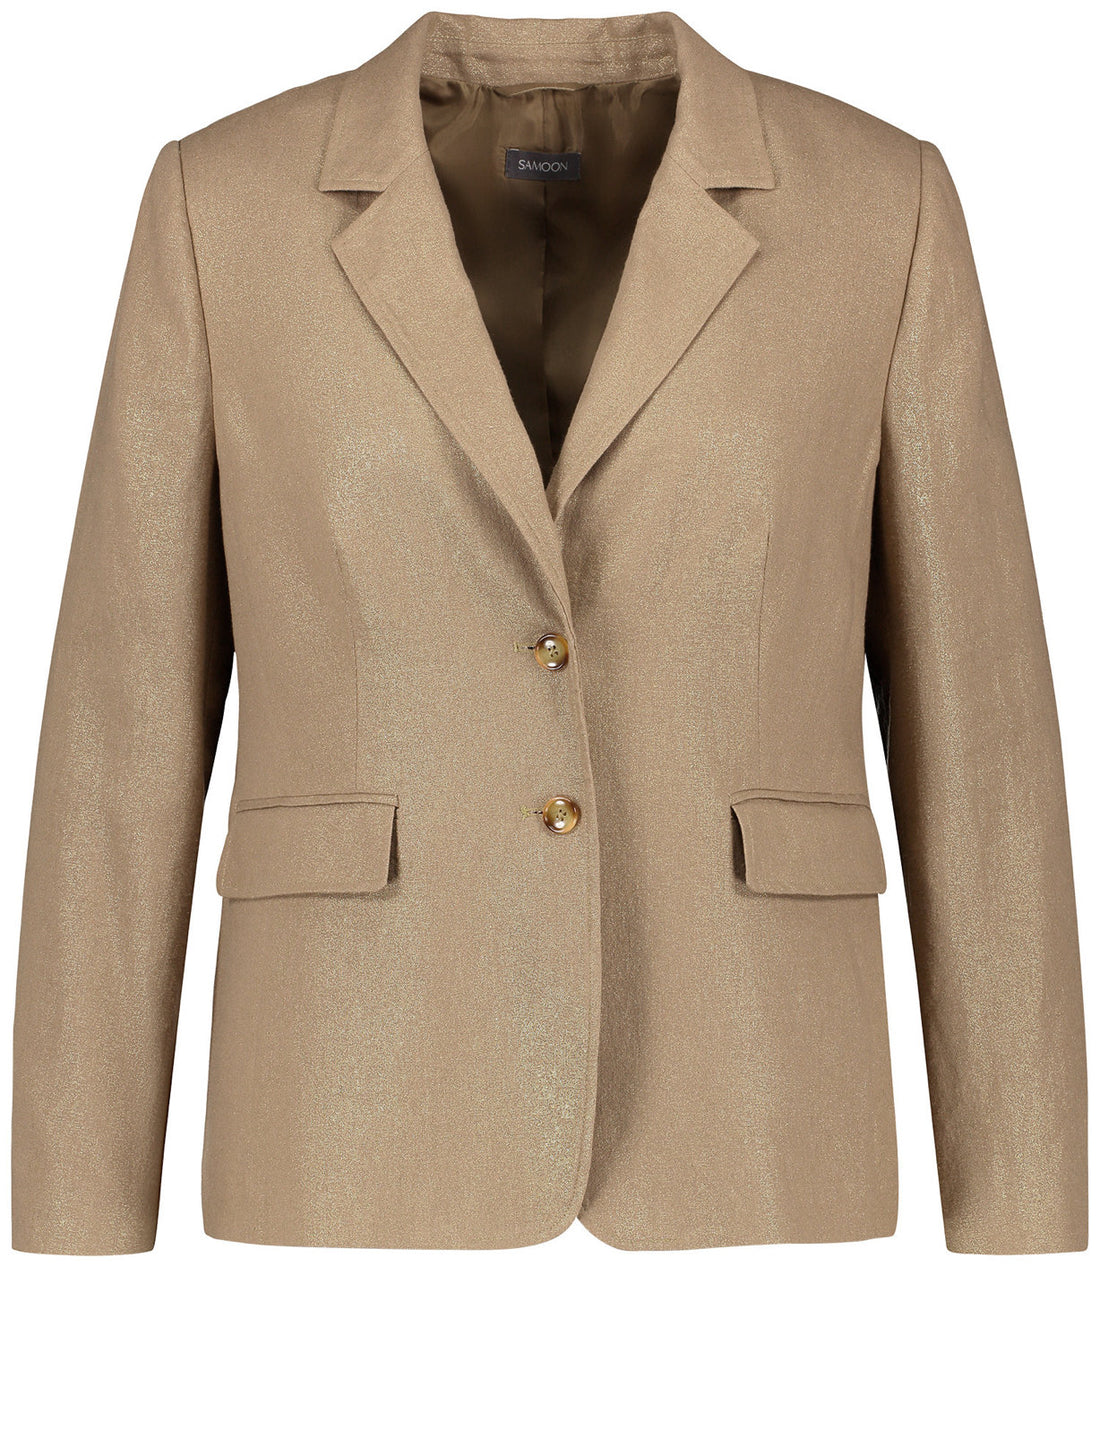 Blazer With A Gold Shimmer_430002-21301_7390_02